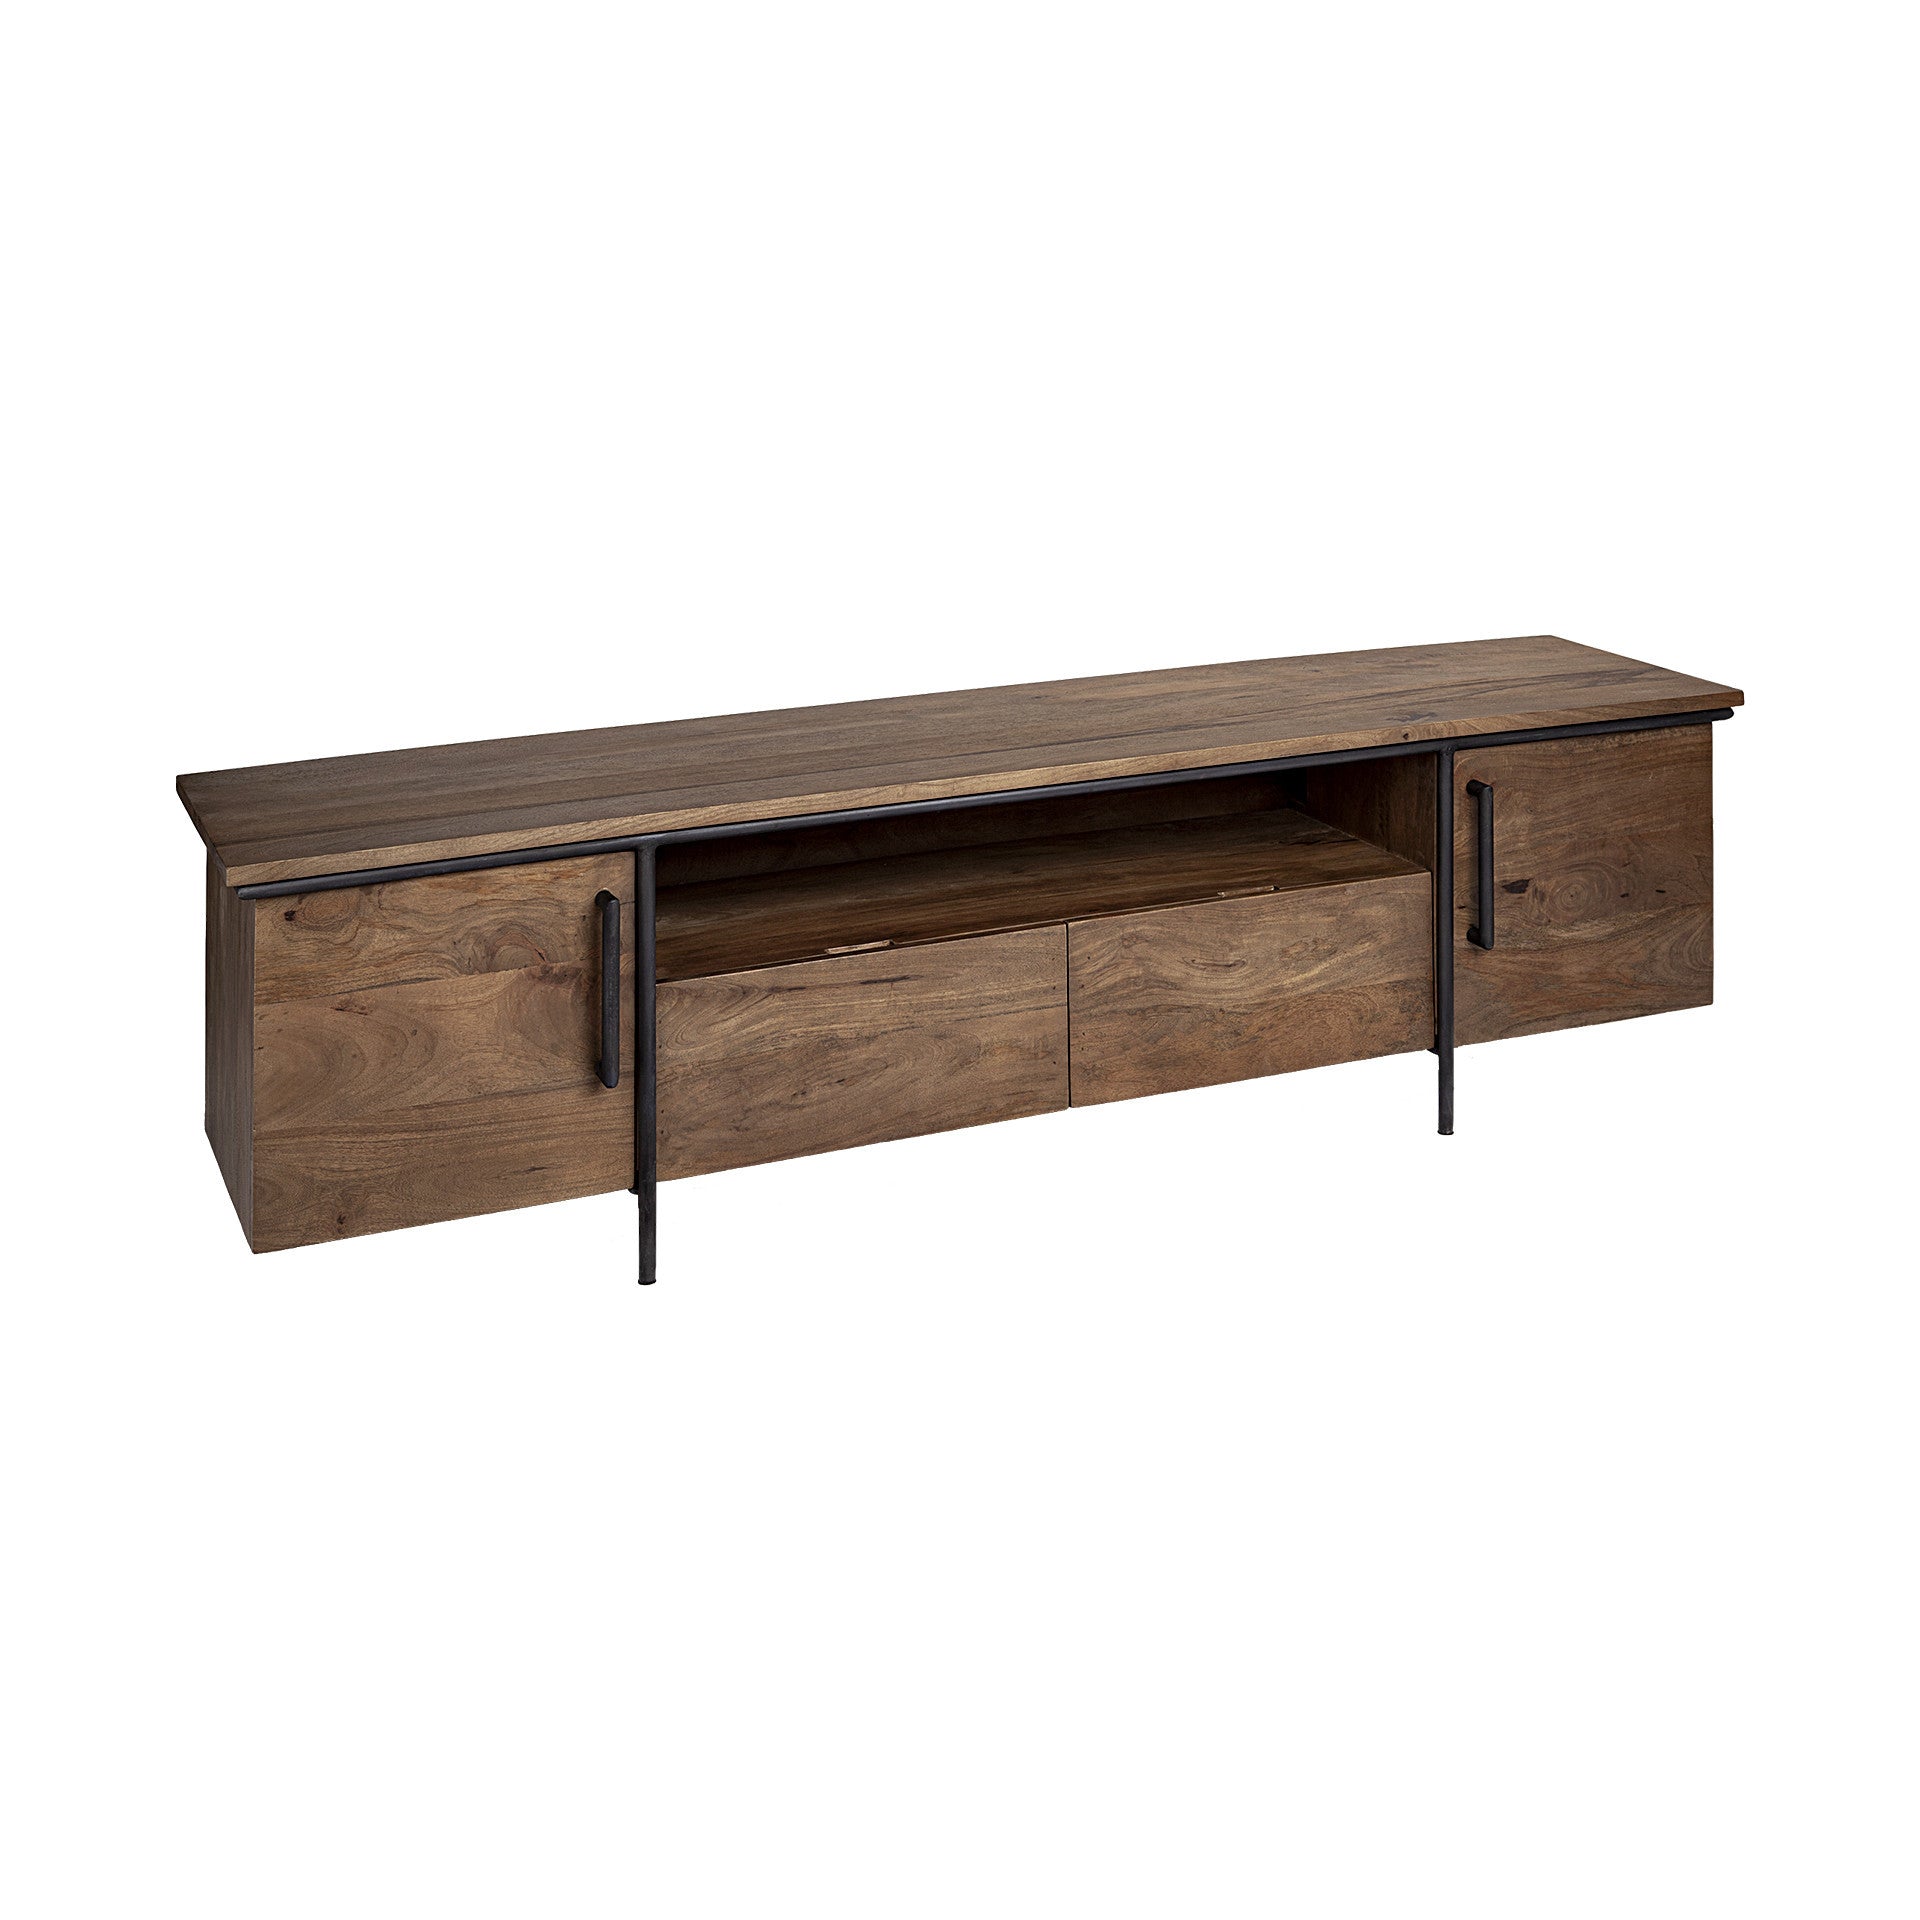 18" Brown 4 Legs Console Table With Storage